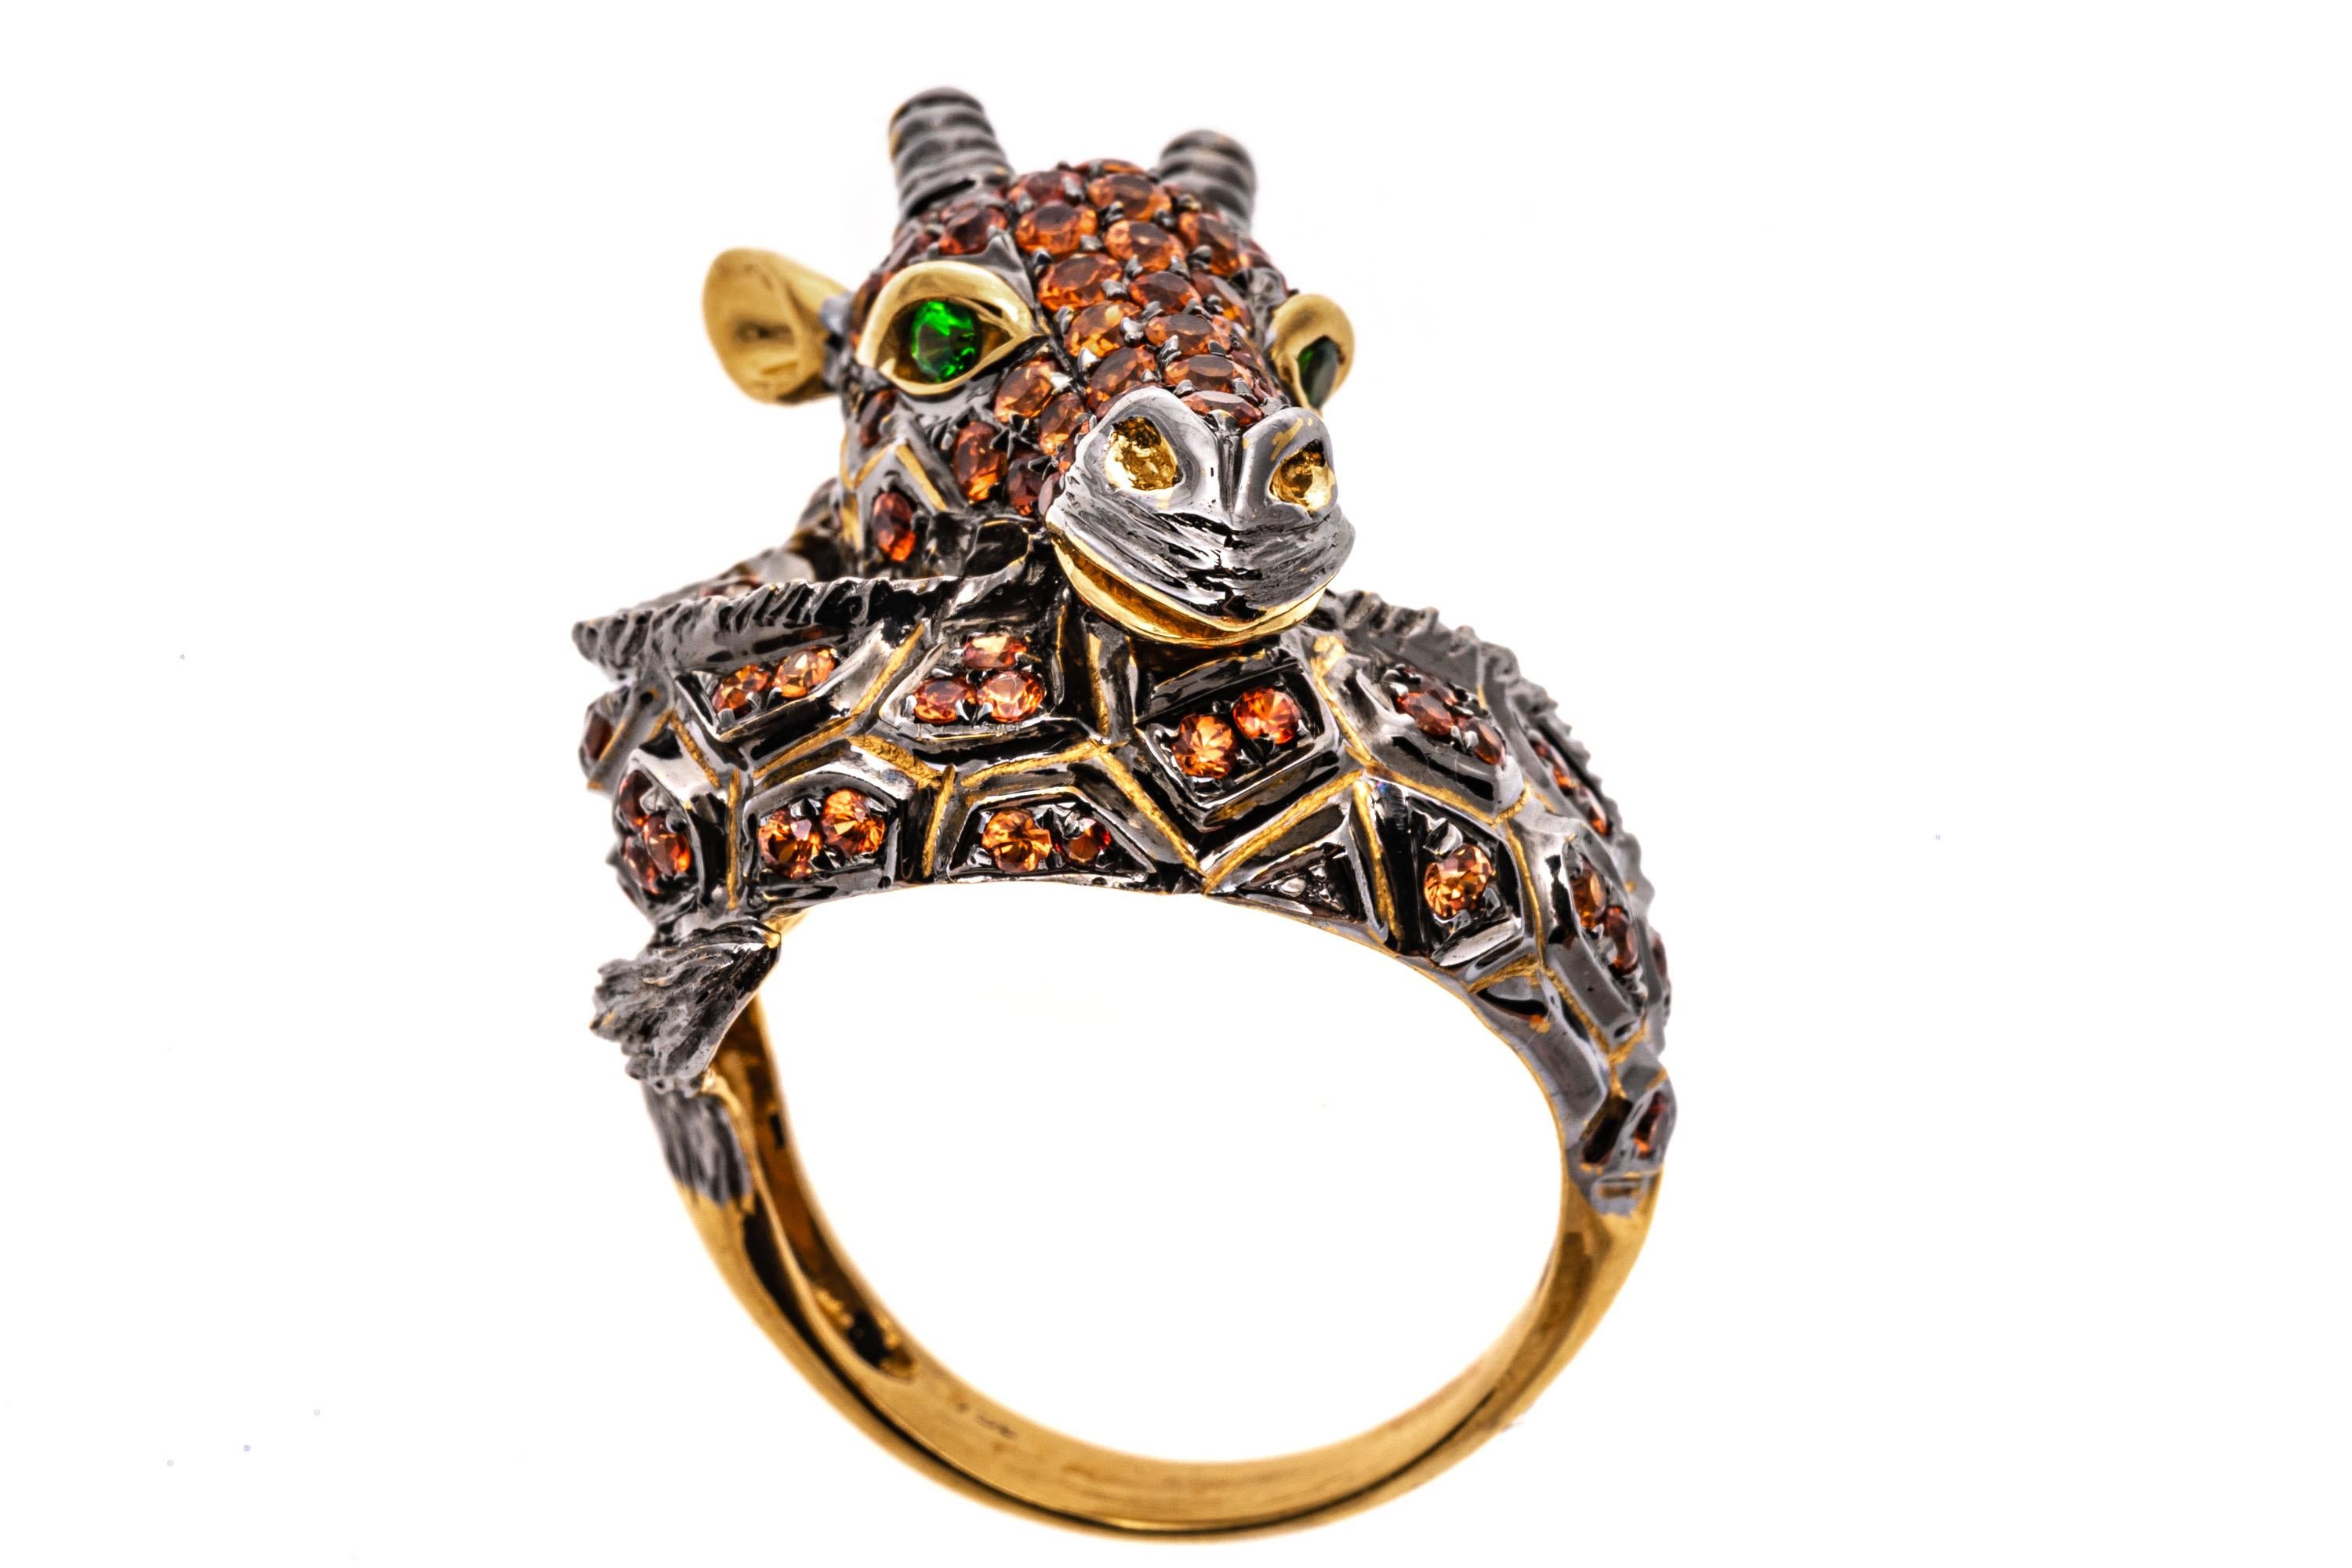 18k Yellow Gold Pave Set Topaz Patterned Figural Giraffe Ring For Sale 8